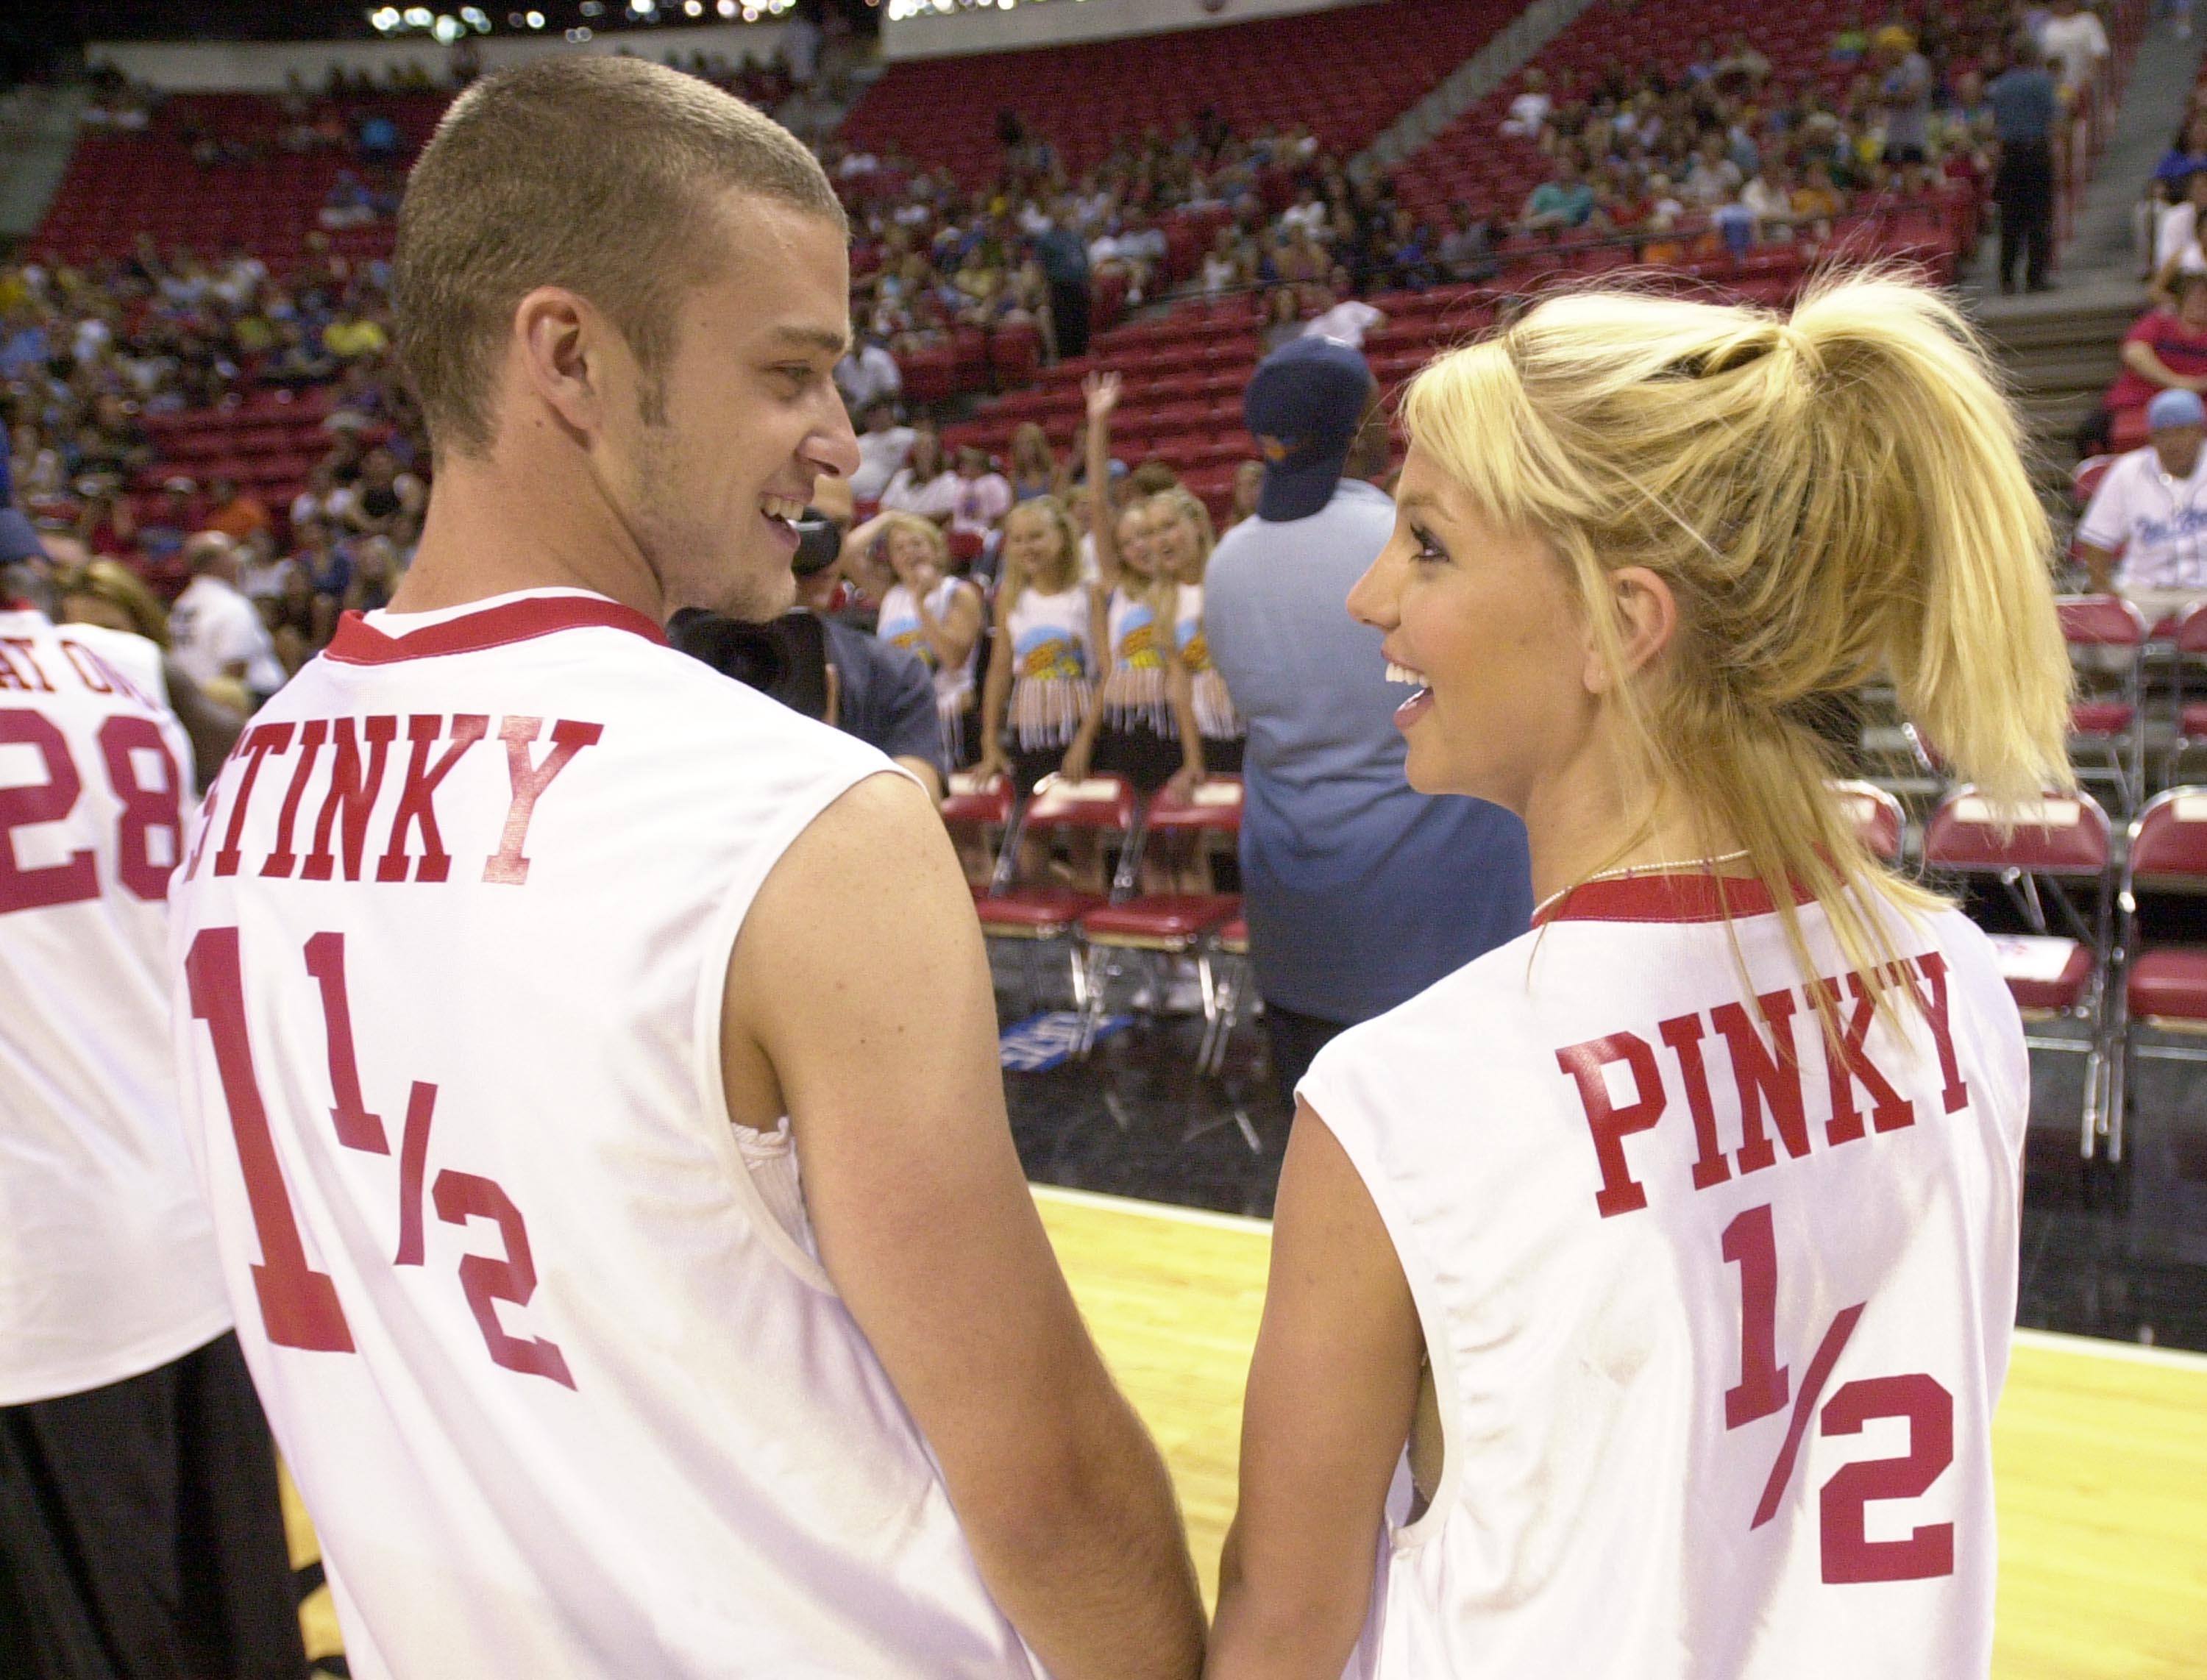 Spears and Timberlake were pictured in matching basketball jerseys during their public relationship